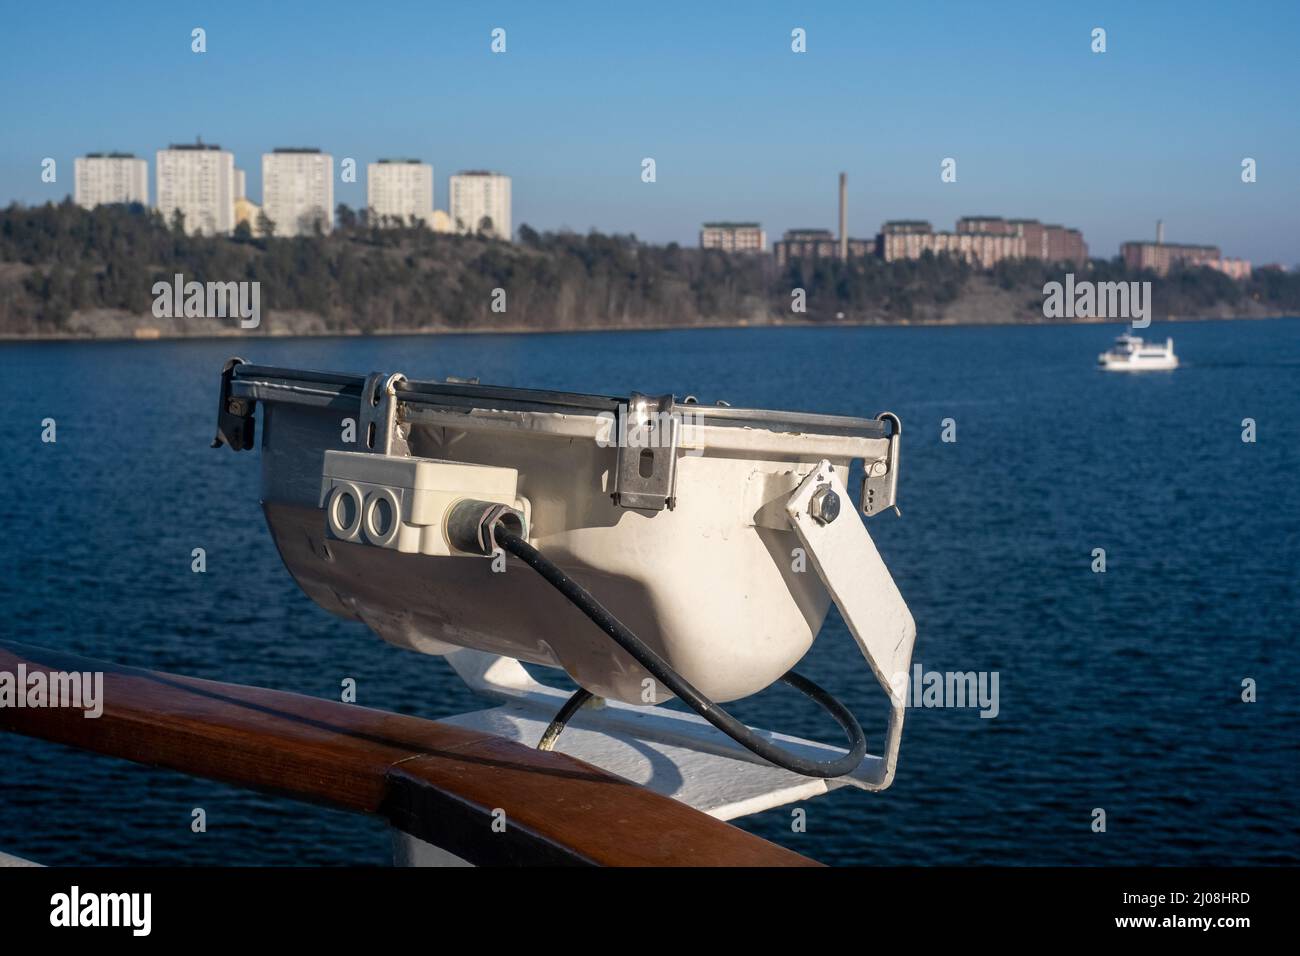 Stockholm / Sweden - MARCH 14, 2022: Closeup of a floodlight attached to a railing with Lidingö residential district in the background. Stock Photo